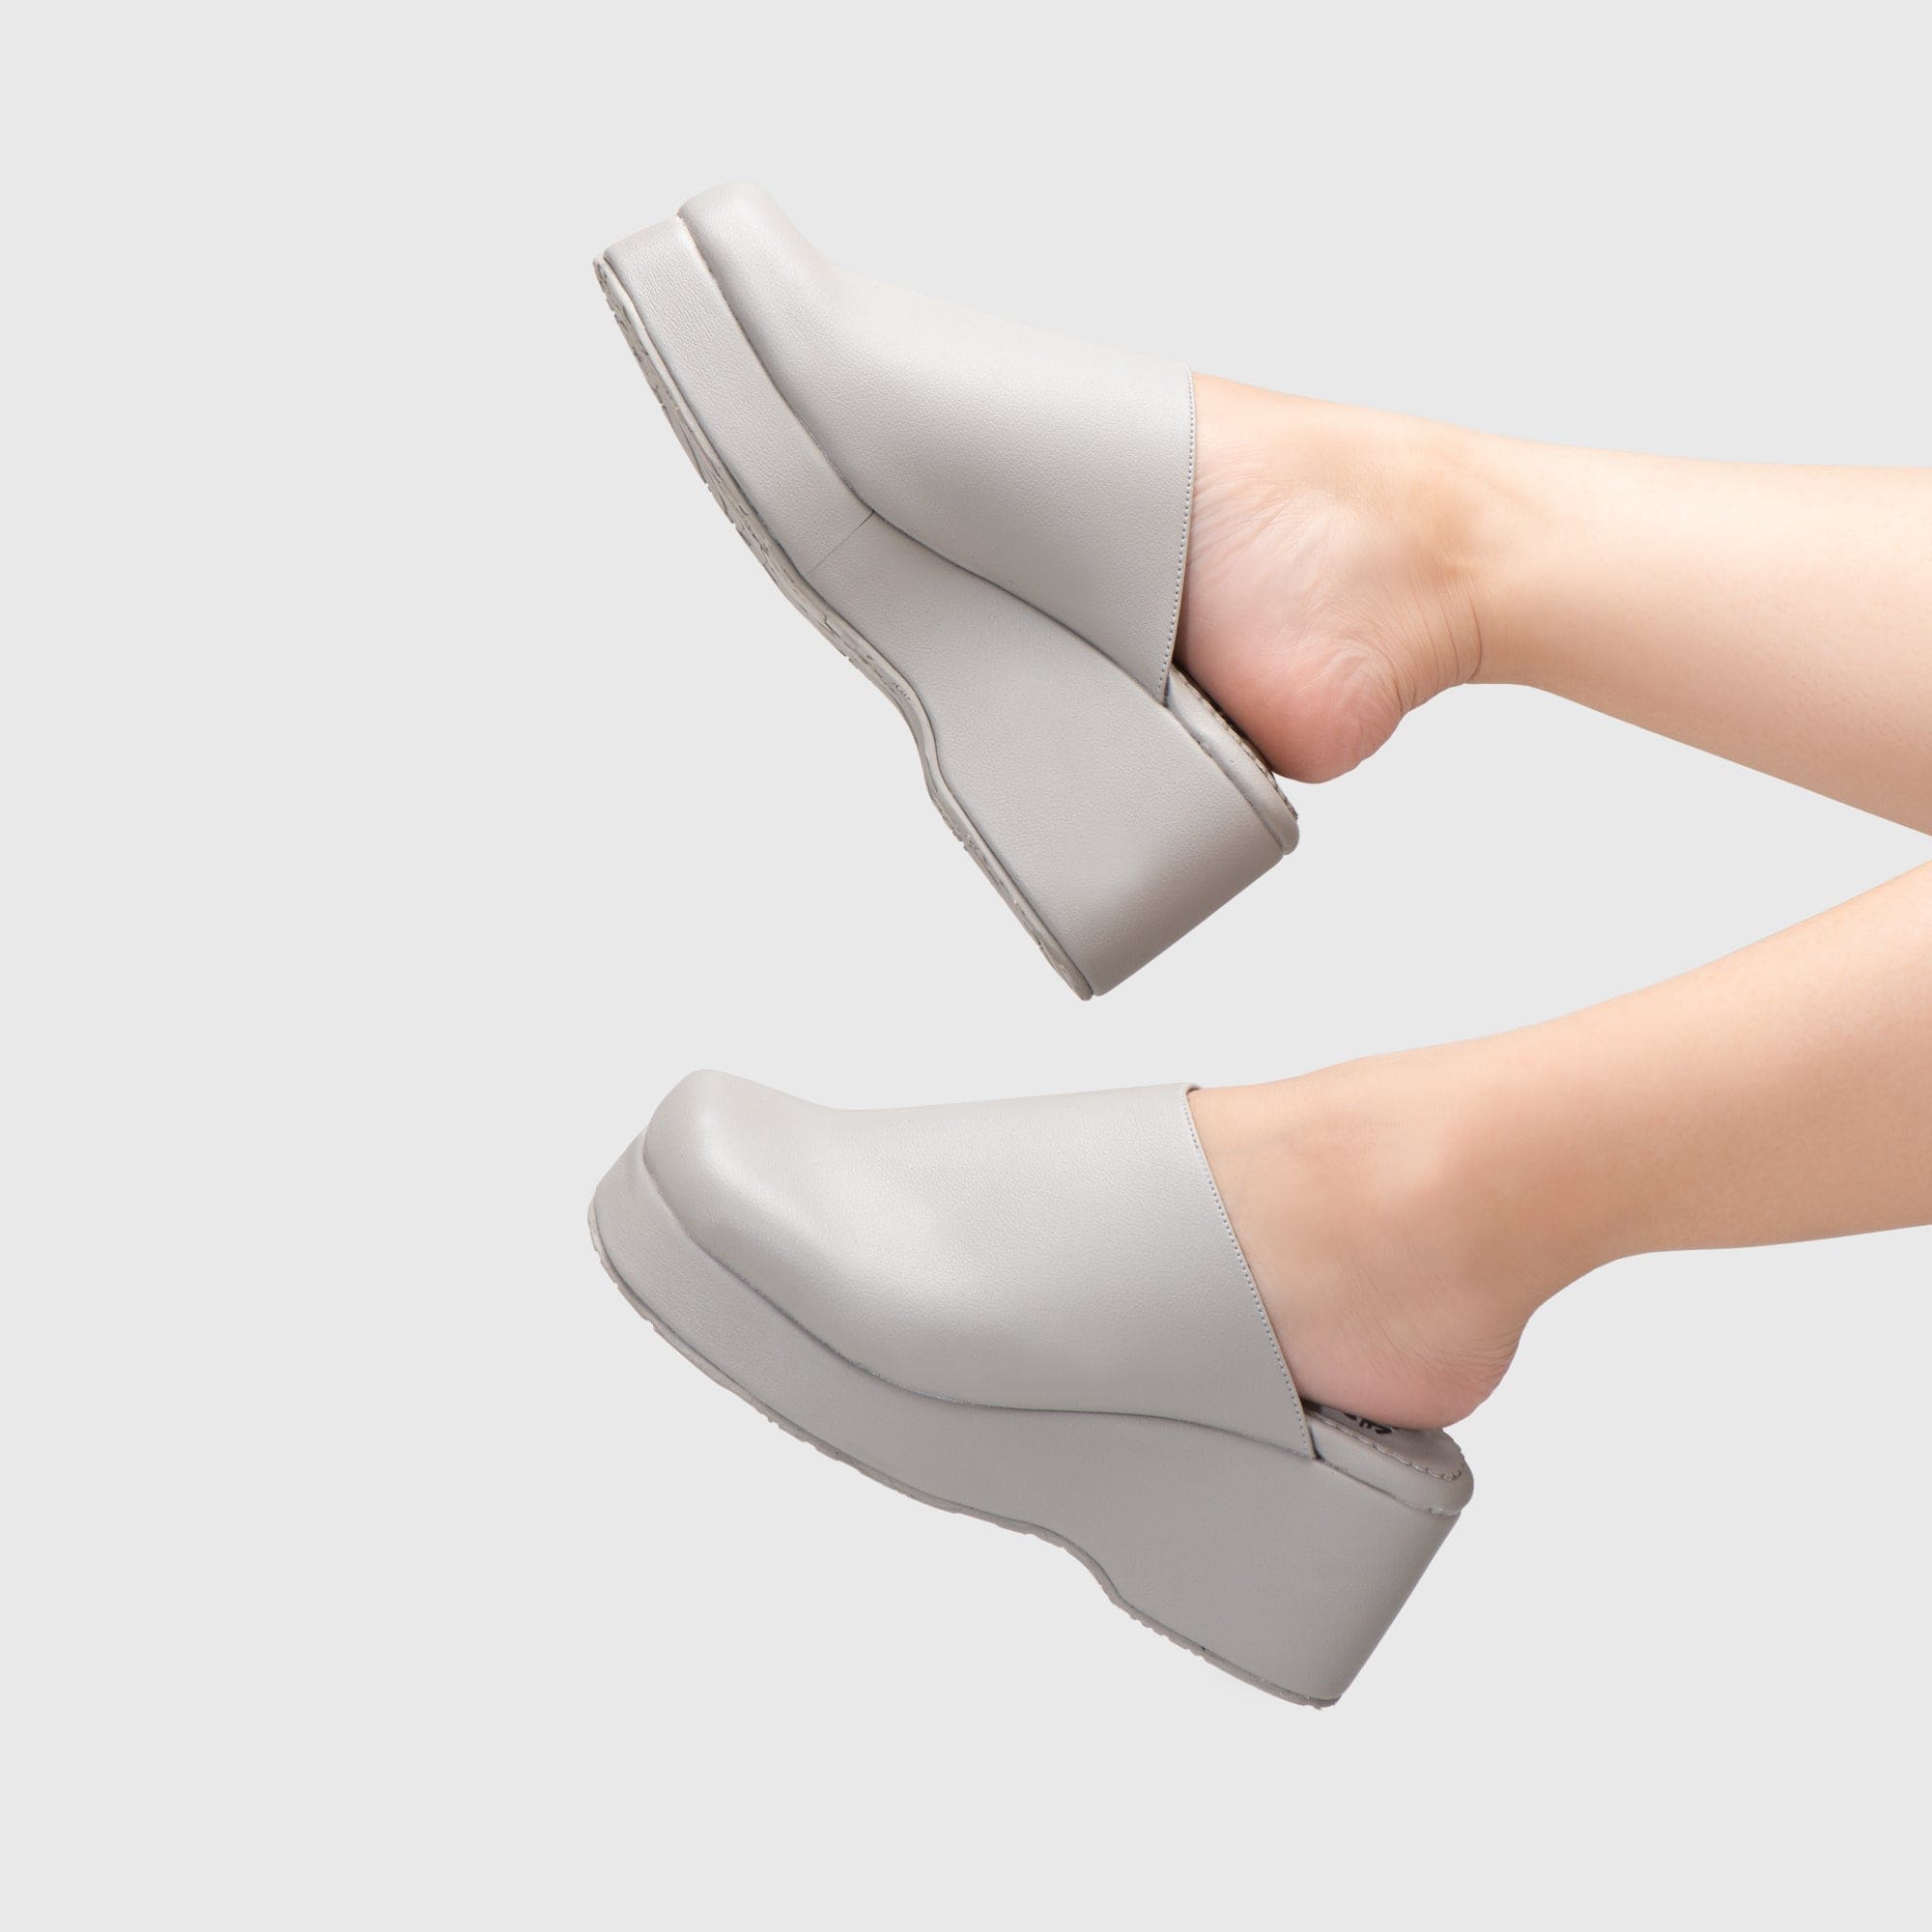 Adorable Projects Official Adorableprojects - Jessie Platform Grey - Sandal Wanita